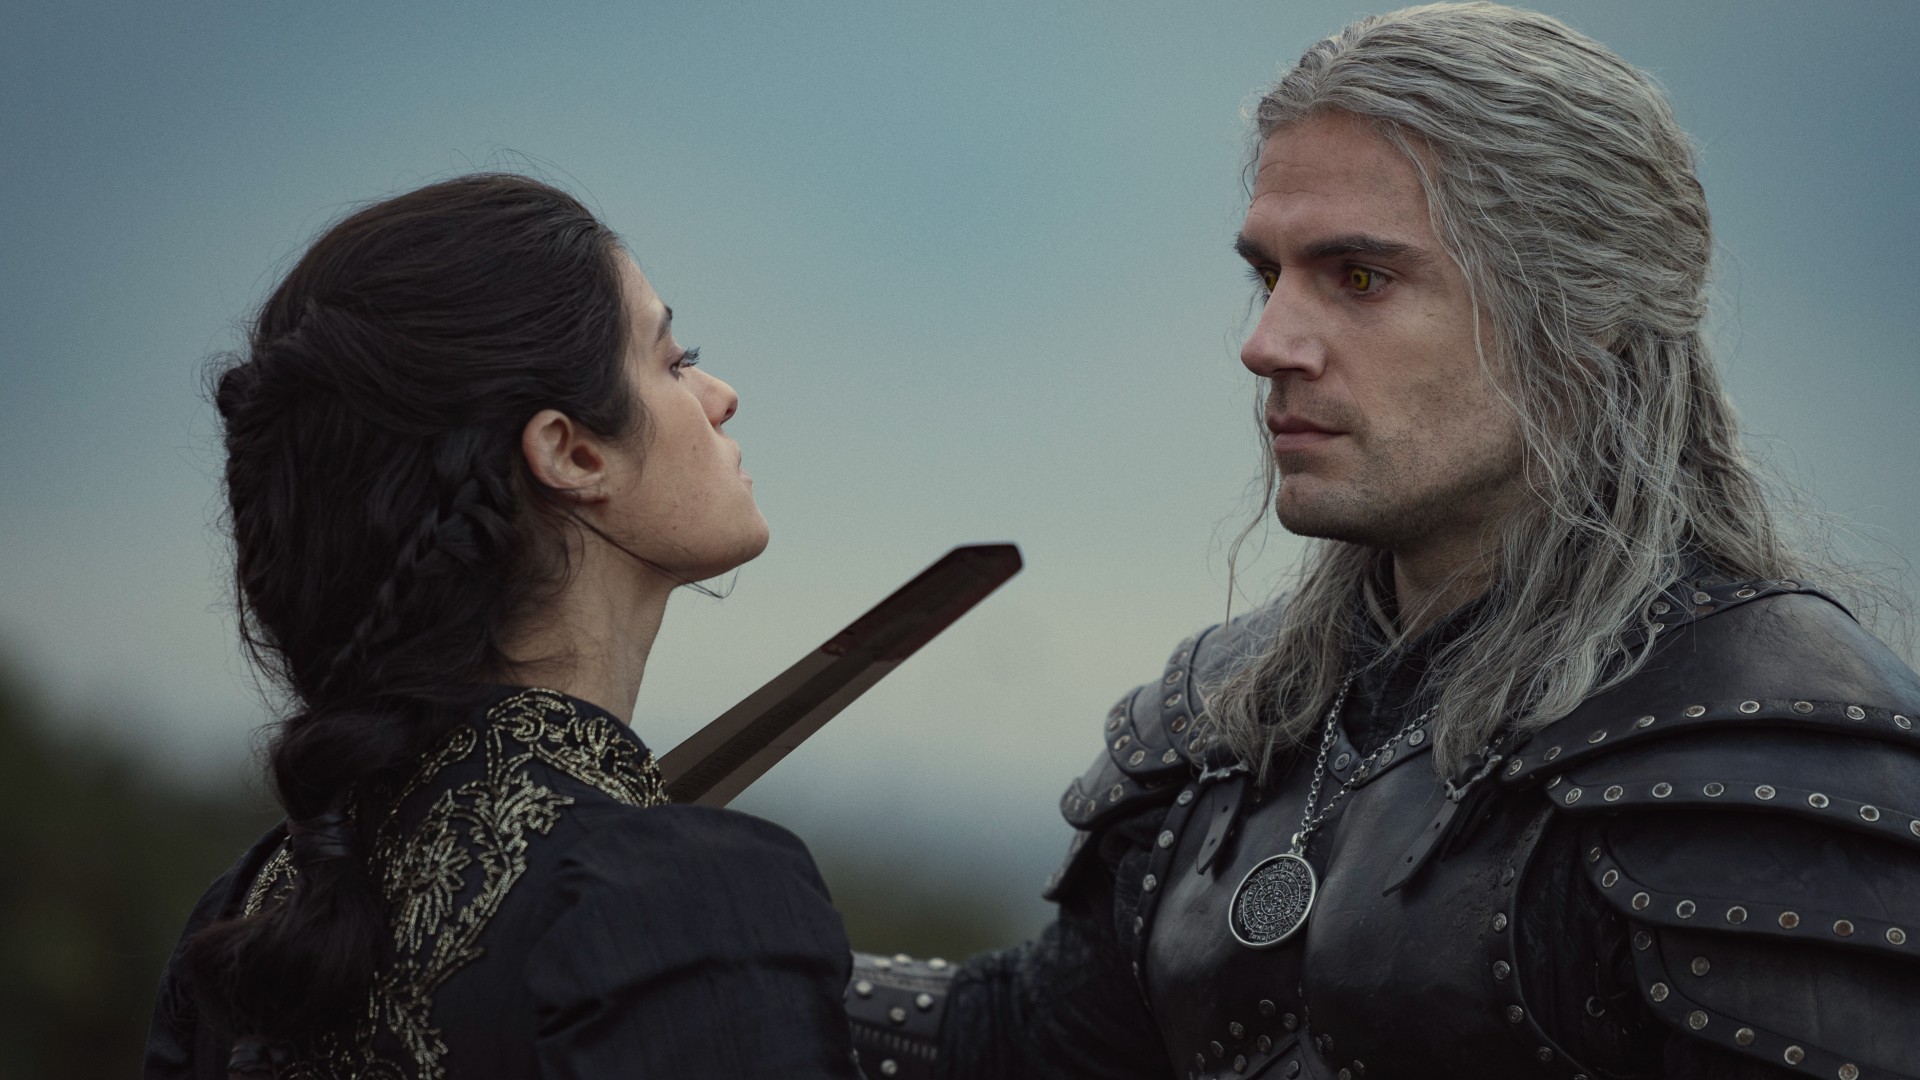 The Witcher Season 3: Henry Cavill starrer to release on this date